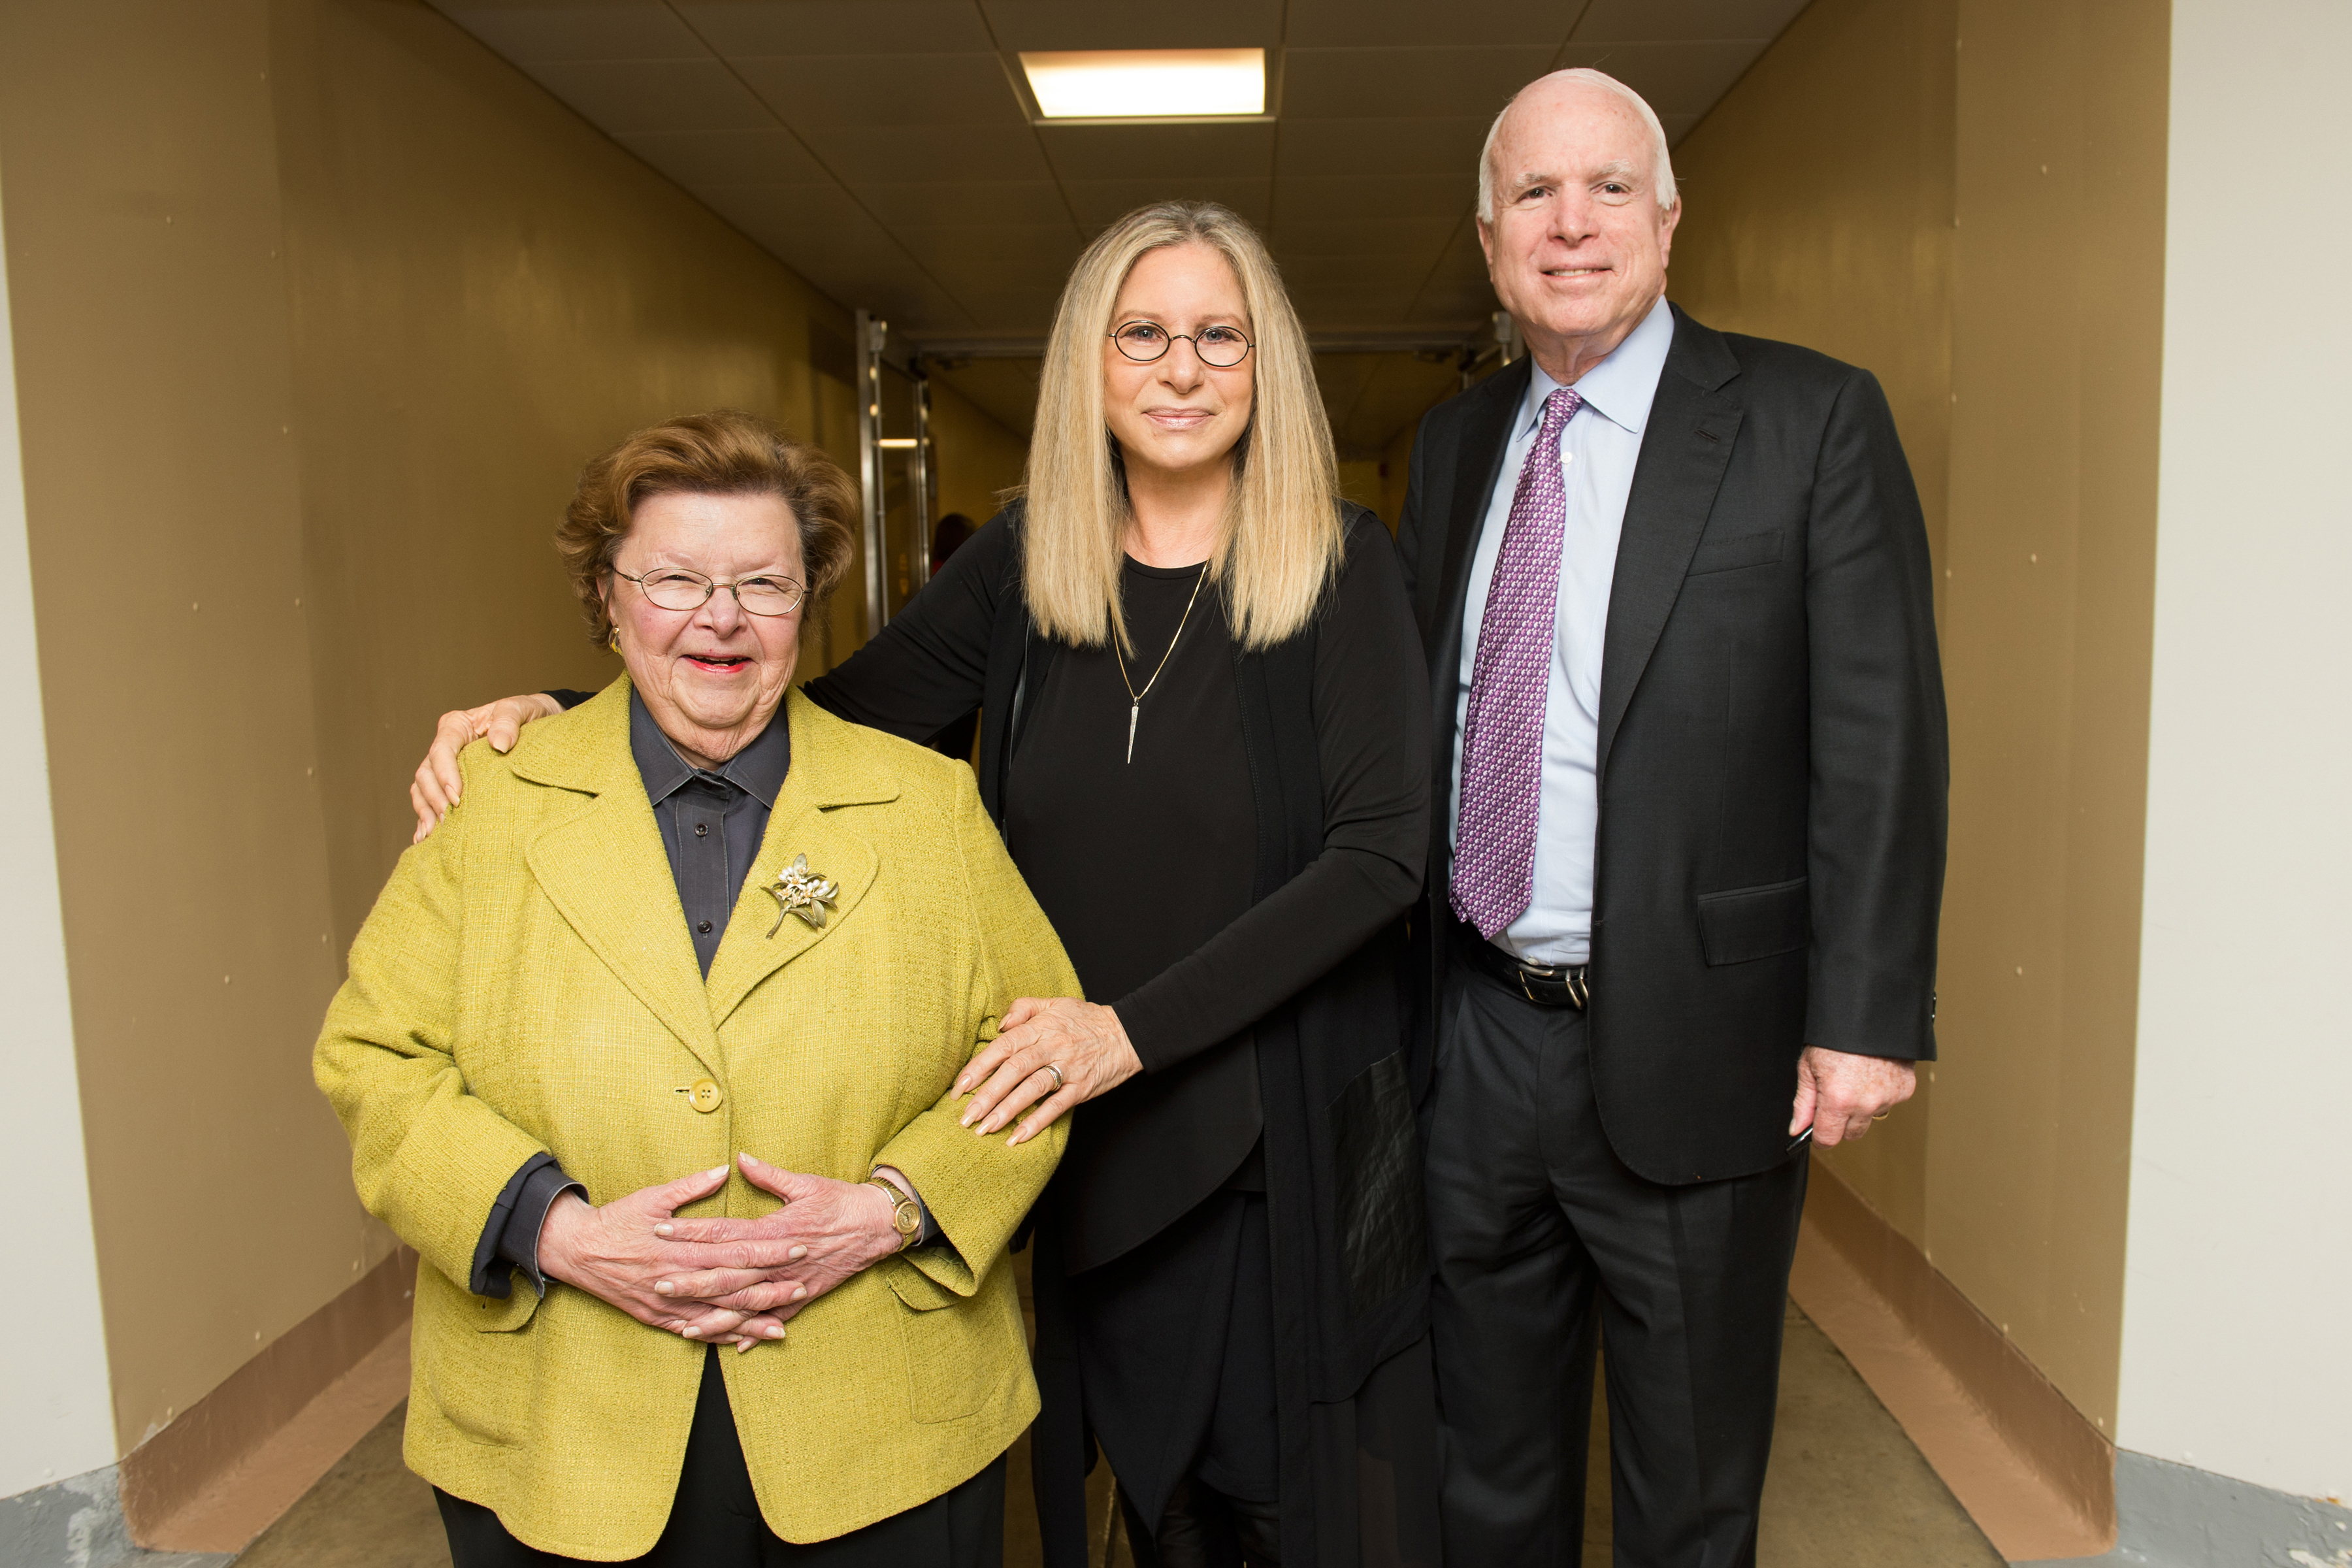 U.S. Senator Mikulski, left, U.S. Senator McCain, right, with Barbra Streisand. Streisand visited Capitol Hill in 2015 to educate key congressional staff about the need for more research on gender differences in heart disease.